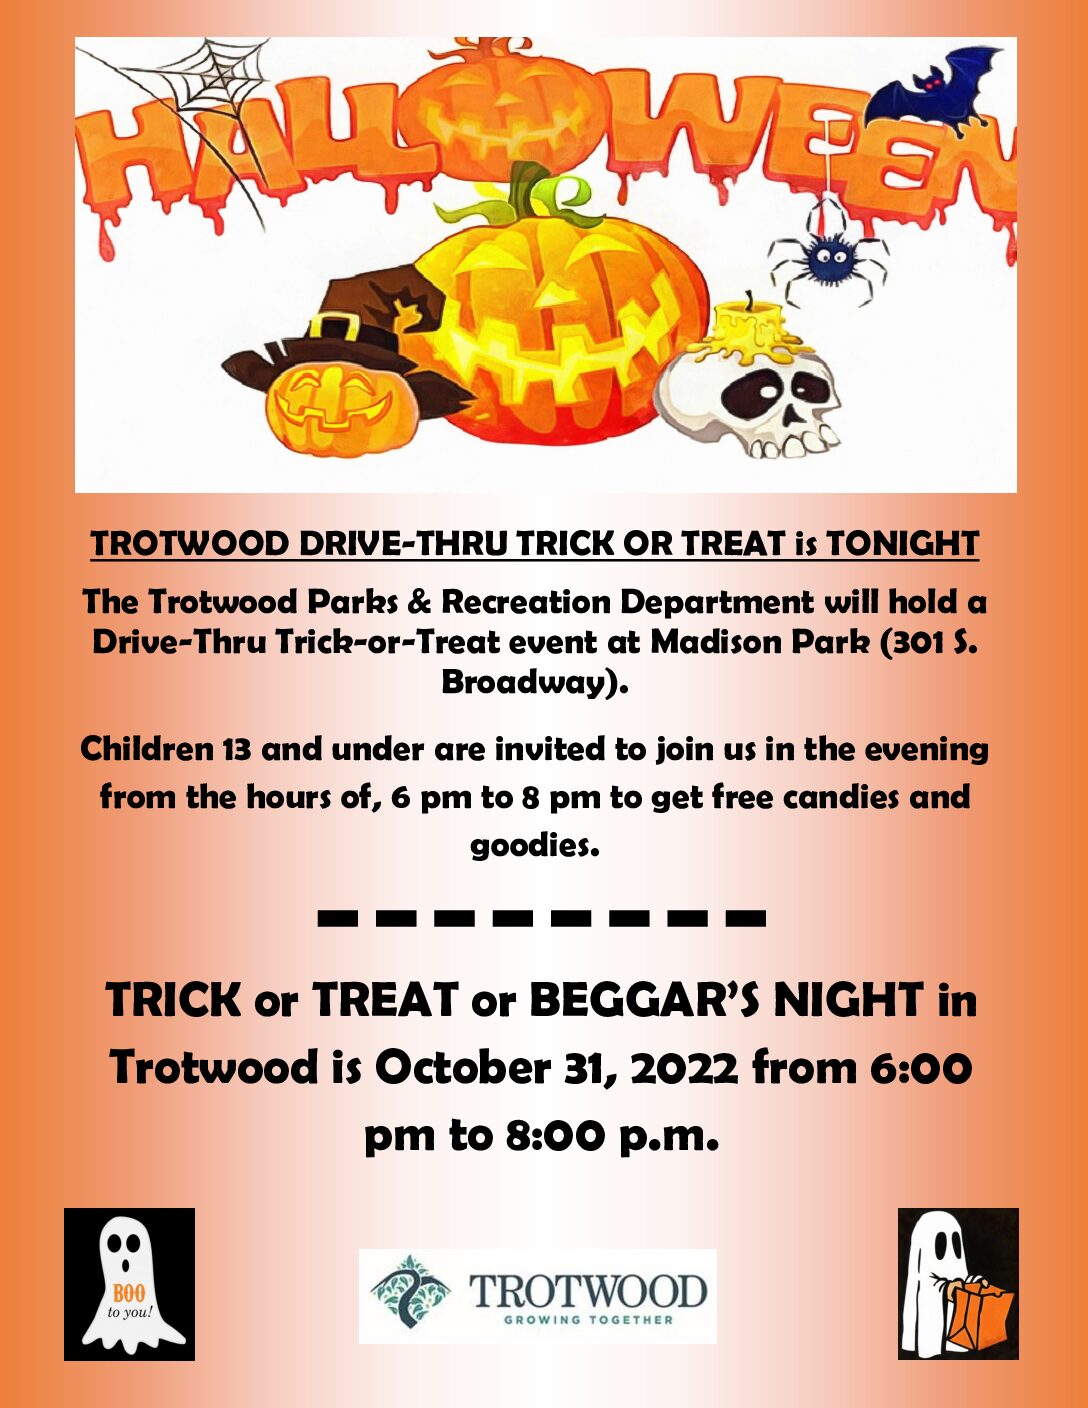 Halloween Info Trick or Treat and Beggar's Night 2022 Trotwood, Ohio